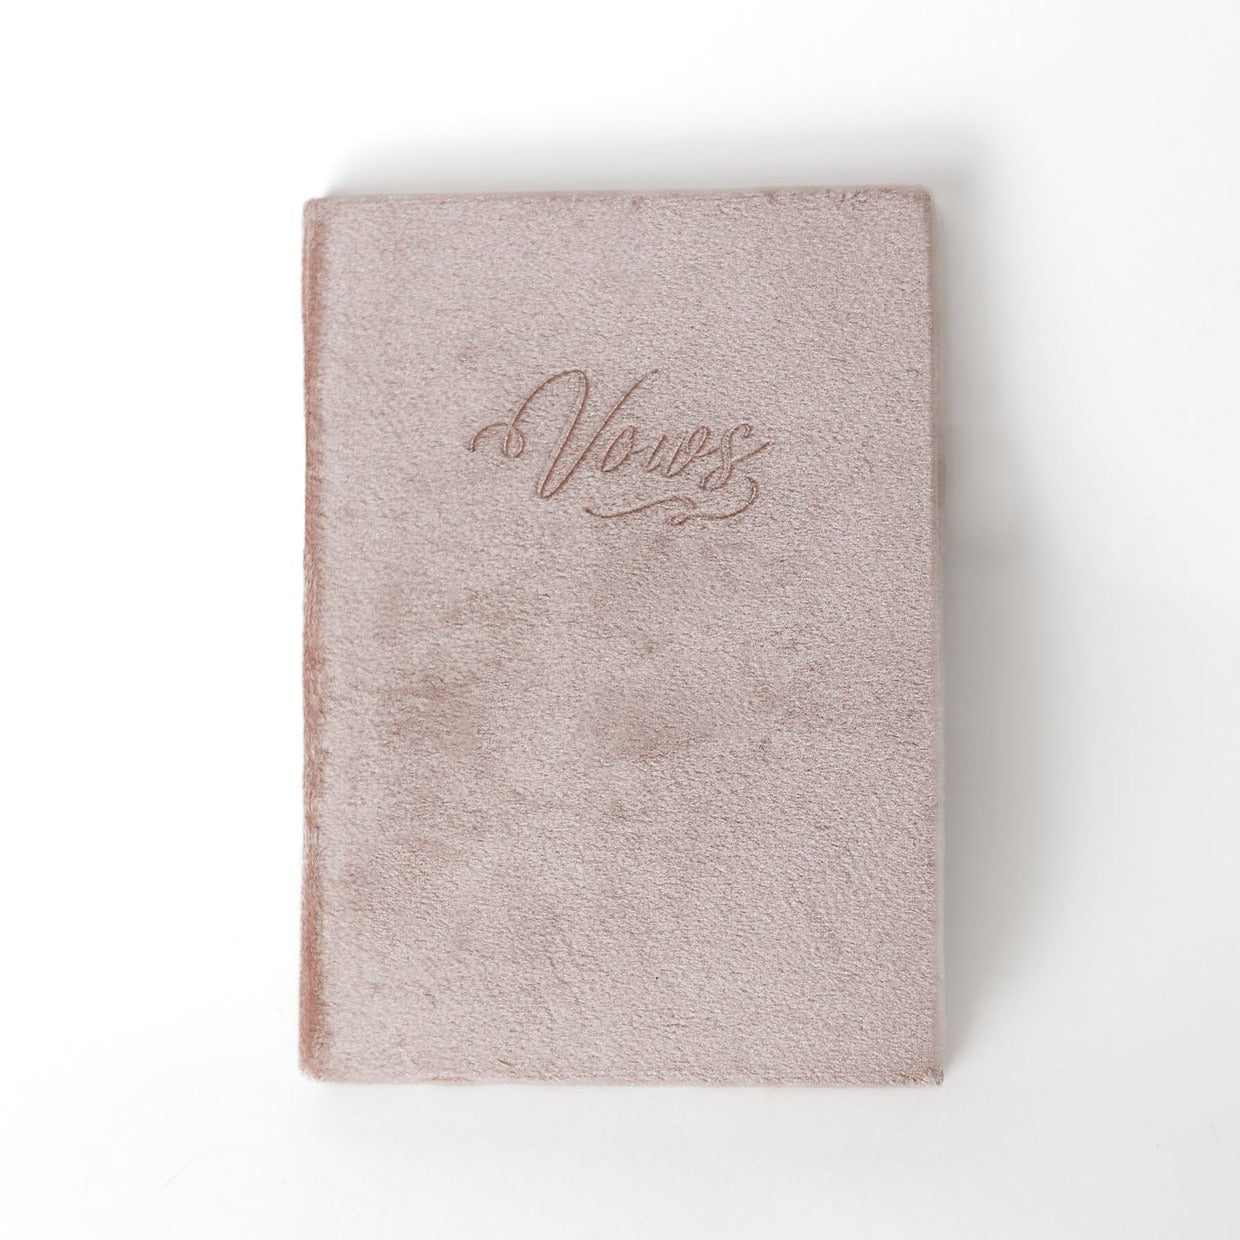 A blush-coloured vow book with the word "Vows" embossed on the front cover.